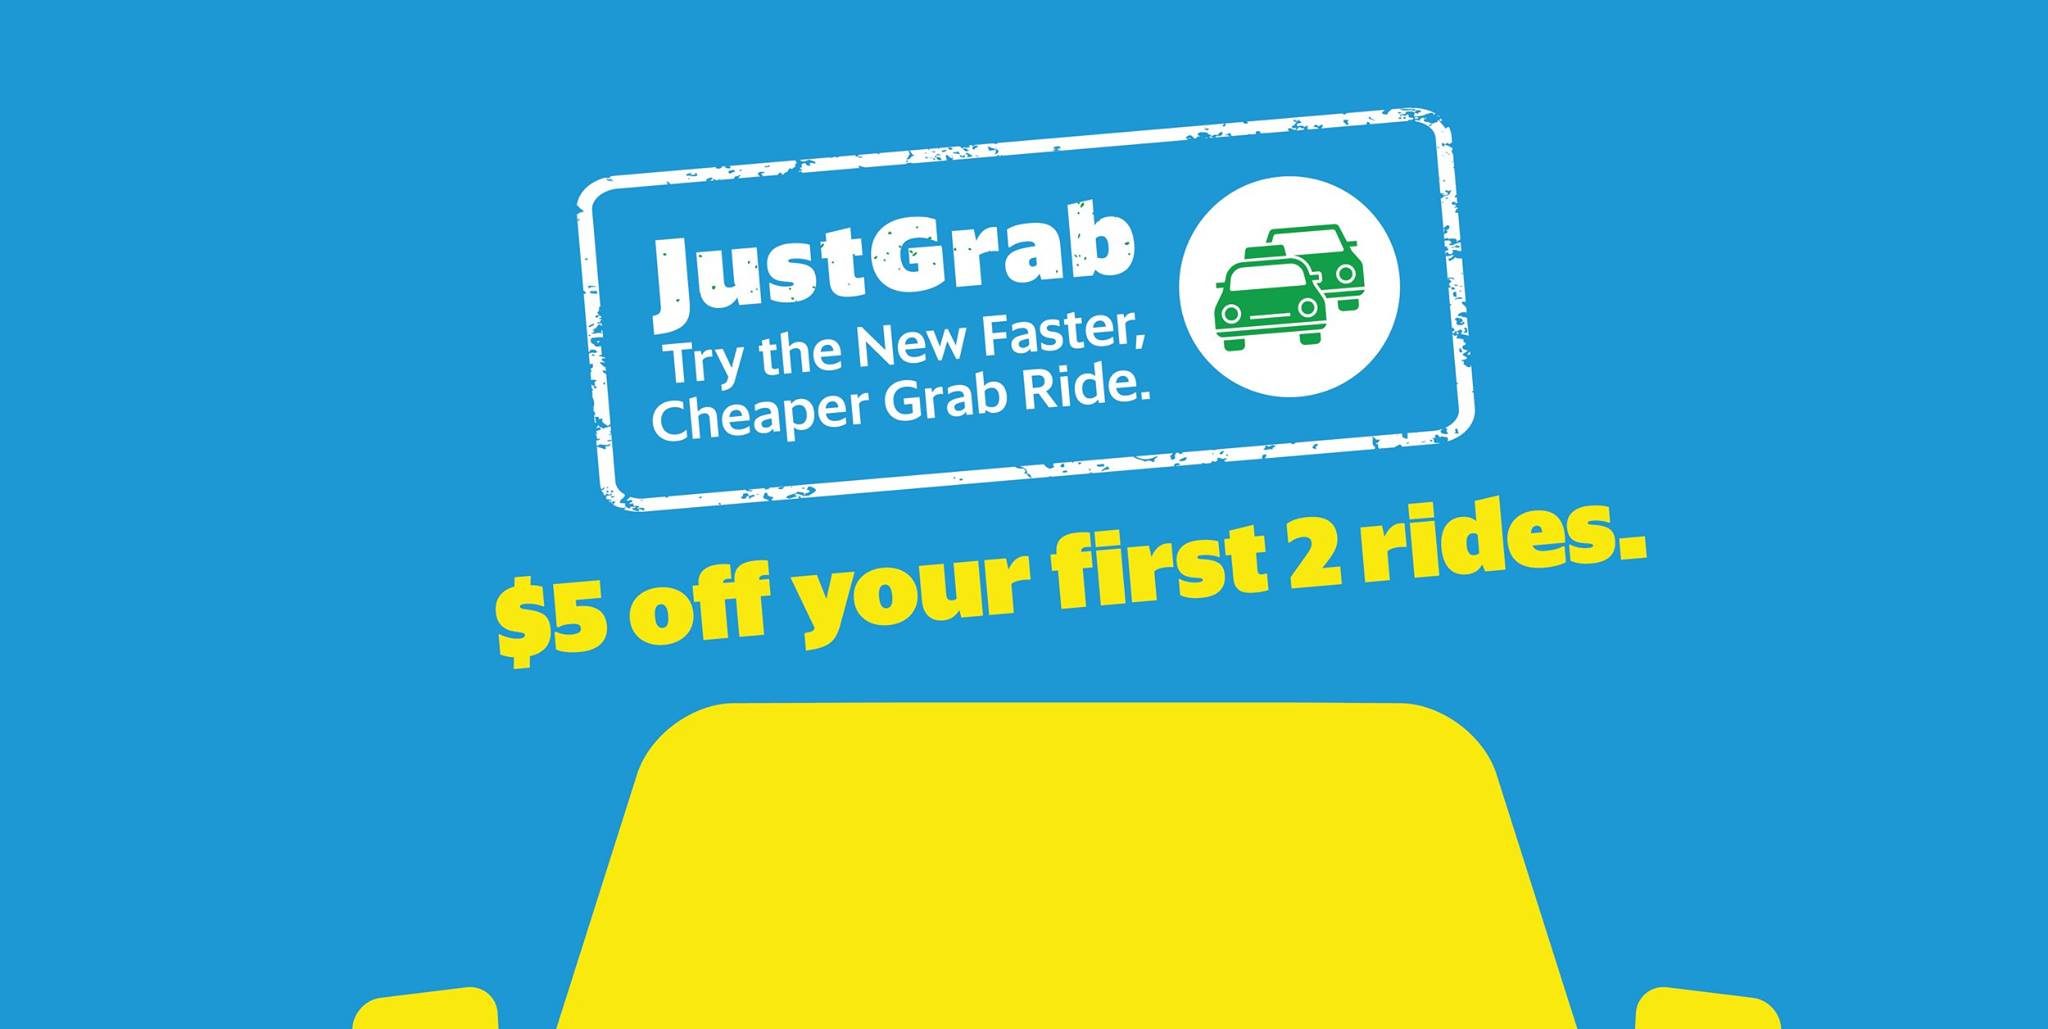 Grab Singapore JustGrab $5 Off First 2 Rides Promotion ends 16 Apr 2017